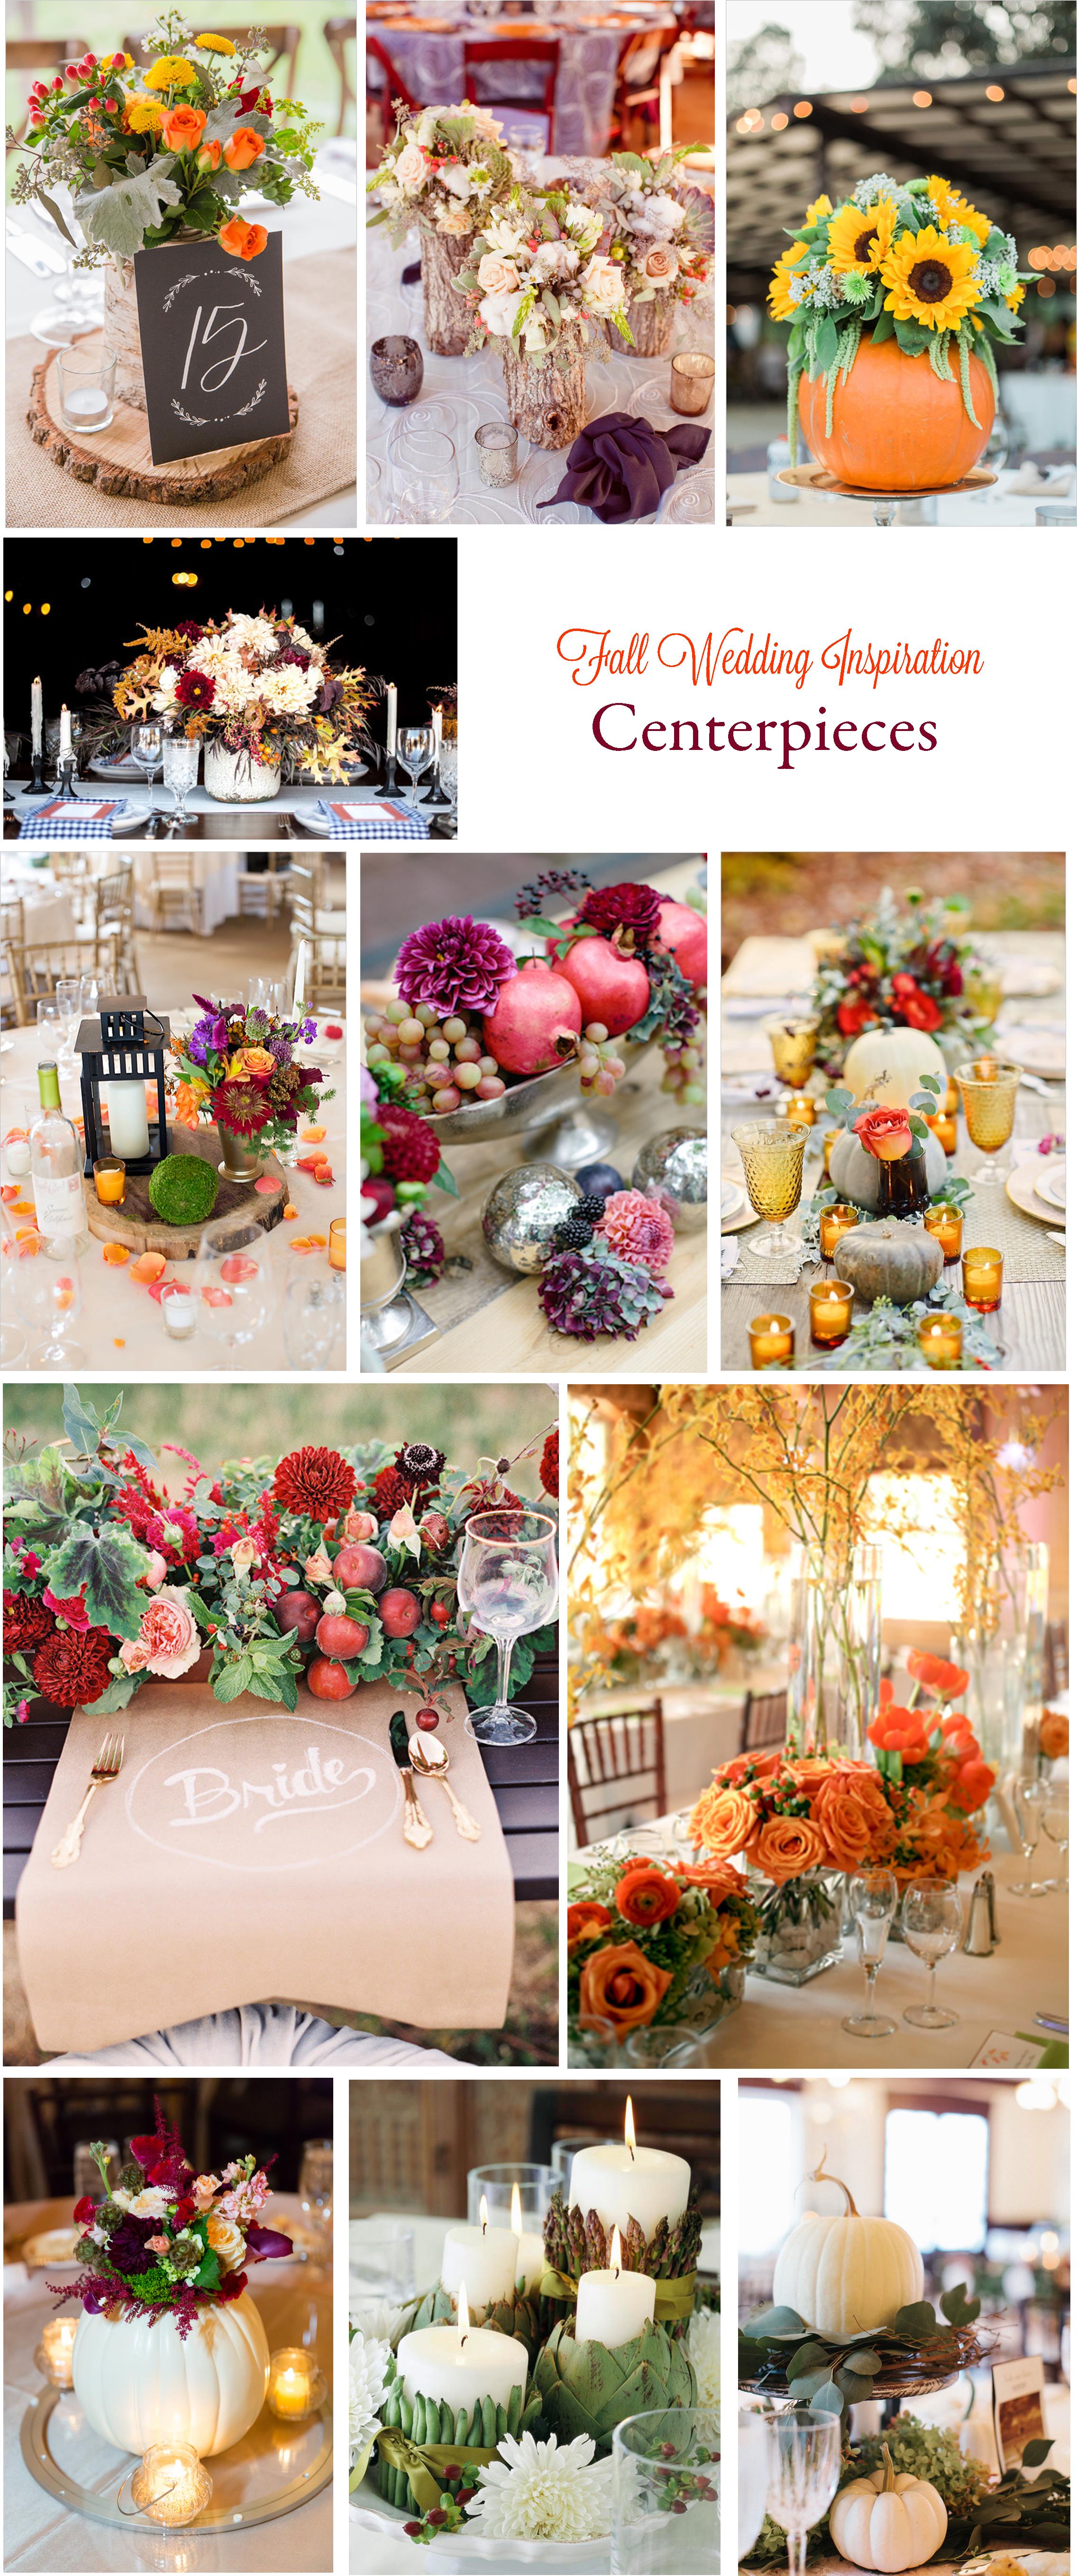 Gorgeous Fall Wedding Inspiration: Tablescapes and Centerpieces | RegistryFinder.com